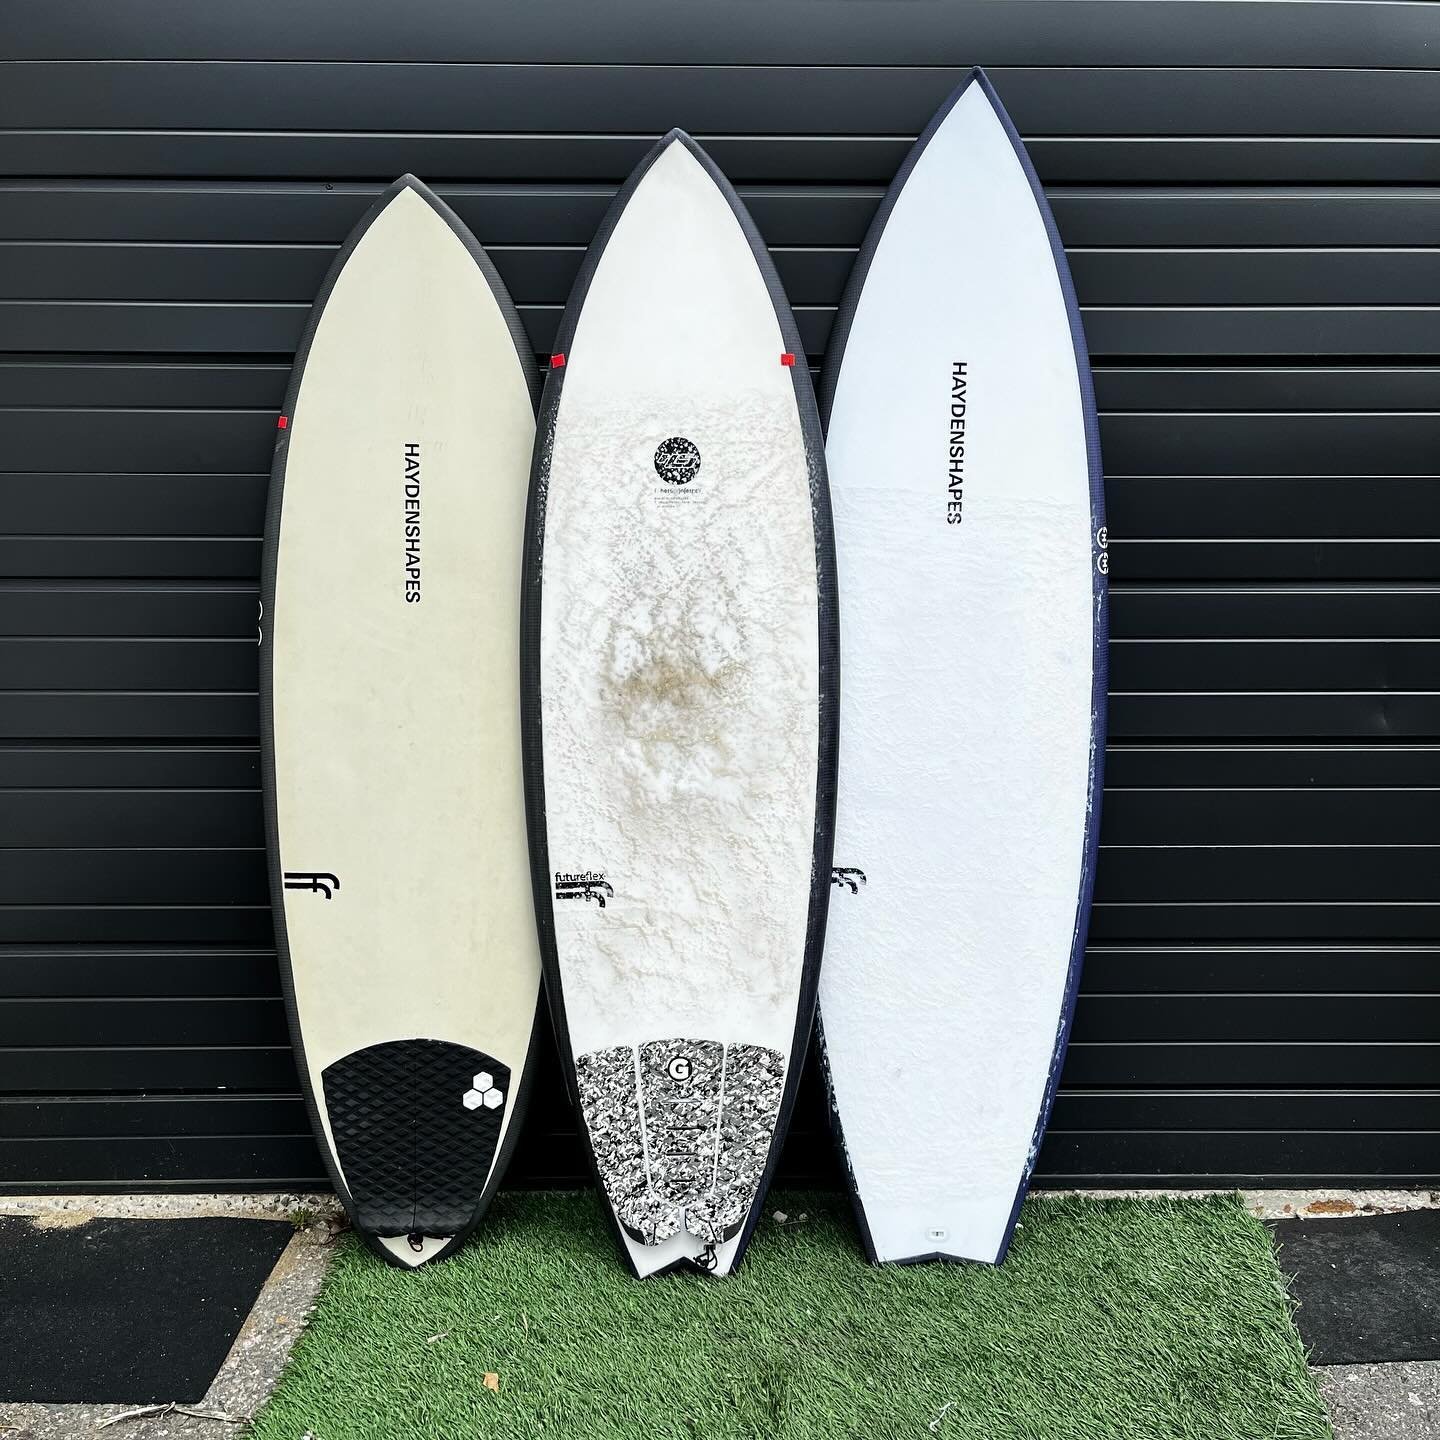 3 used @haydenshapes

Left: Hypto Krypto 5&rsquo;8 x 20 x 2.5 @ 31L
-$599-

Middle: Hypto Step Up 5&rsquo;10 x 19 3/4 x 2 7/16
@ 30.7L 
-$499-

Right: Cohort II 6&rsquo;2 x 20 5/8 x 2 9/16 
@35.2L
-$599-